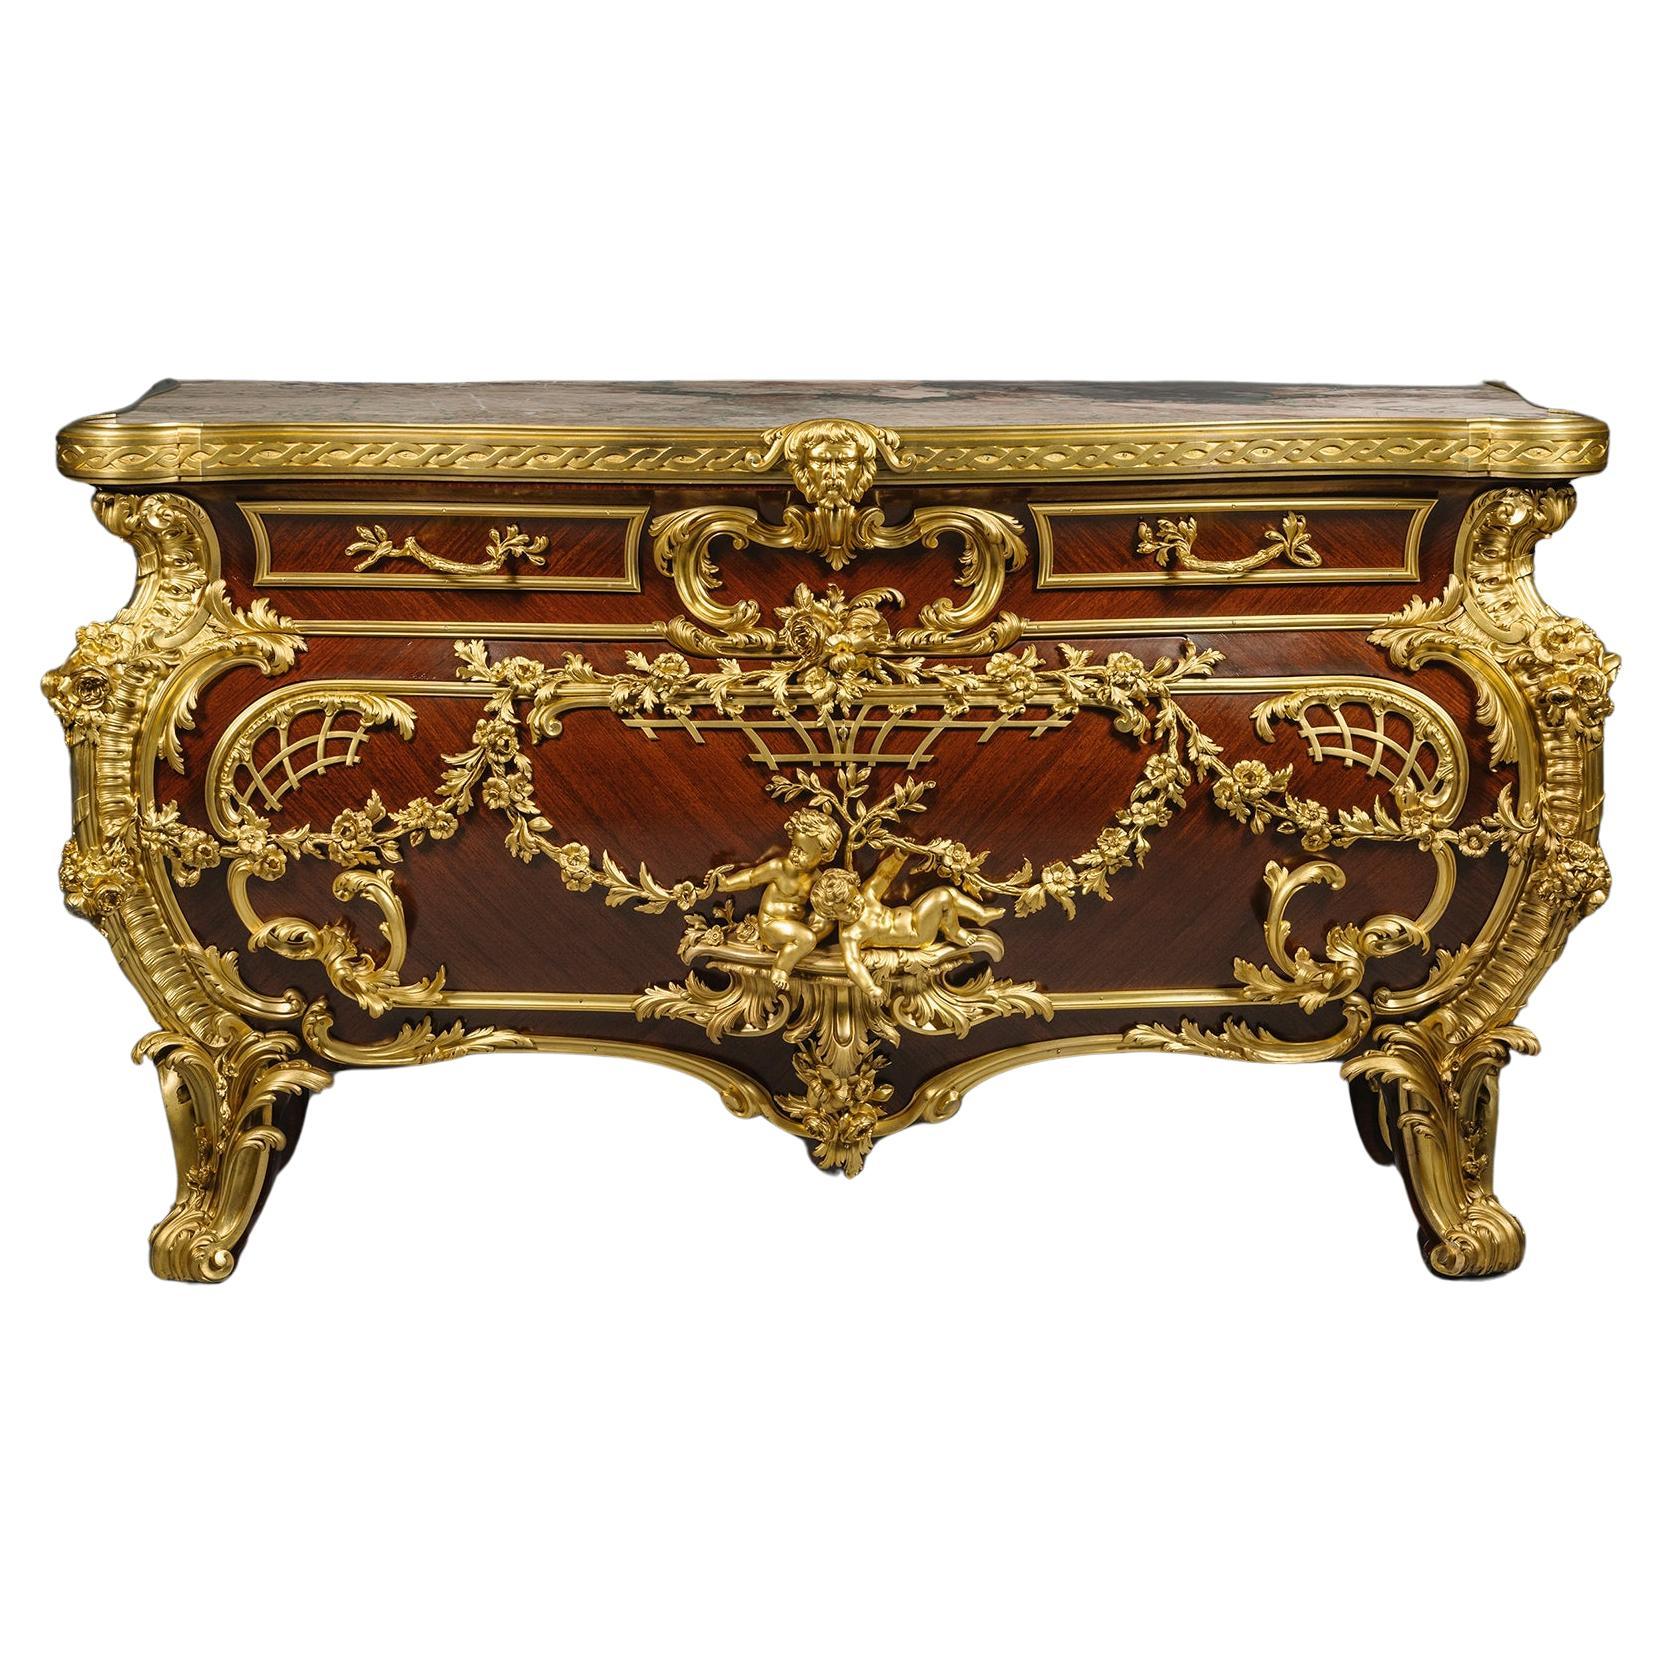 A Magnificent Rococo Style Commode After Johann Melchoir Kambli For Sale